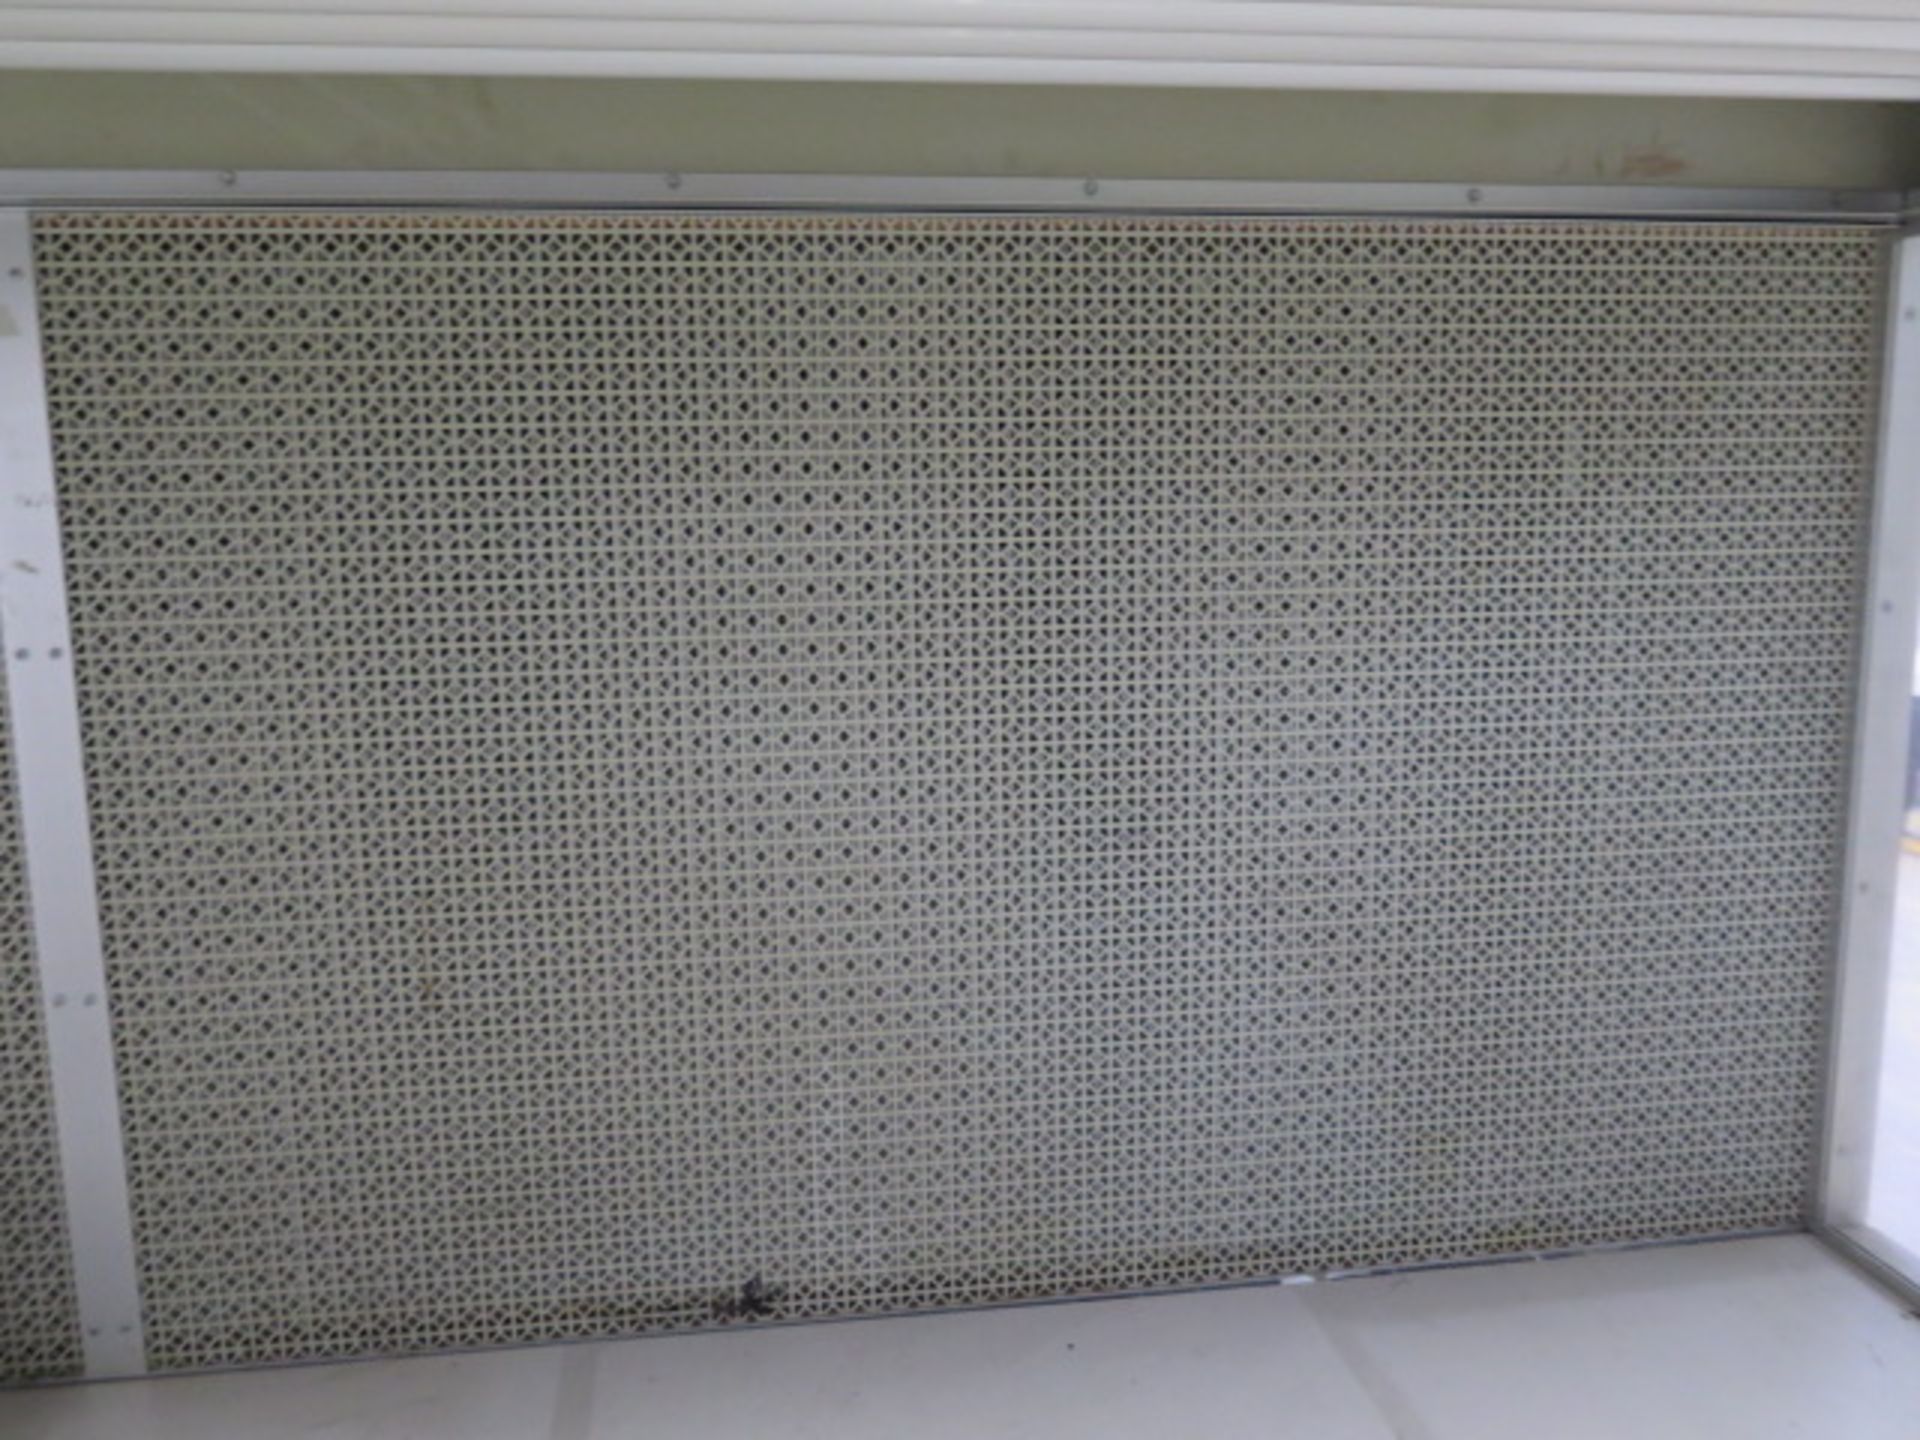 Airtech Fume Ventilation Hood (SOLD AS-IS - NO WARRANTY) (Located @ 2229 Ringwood Ave. San Jose) - Image 3 of 6